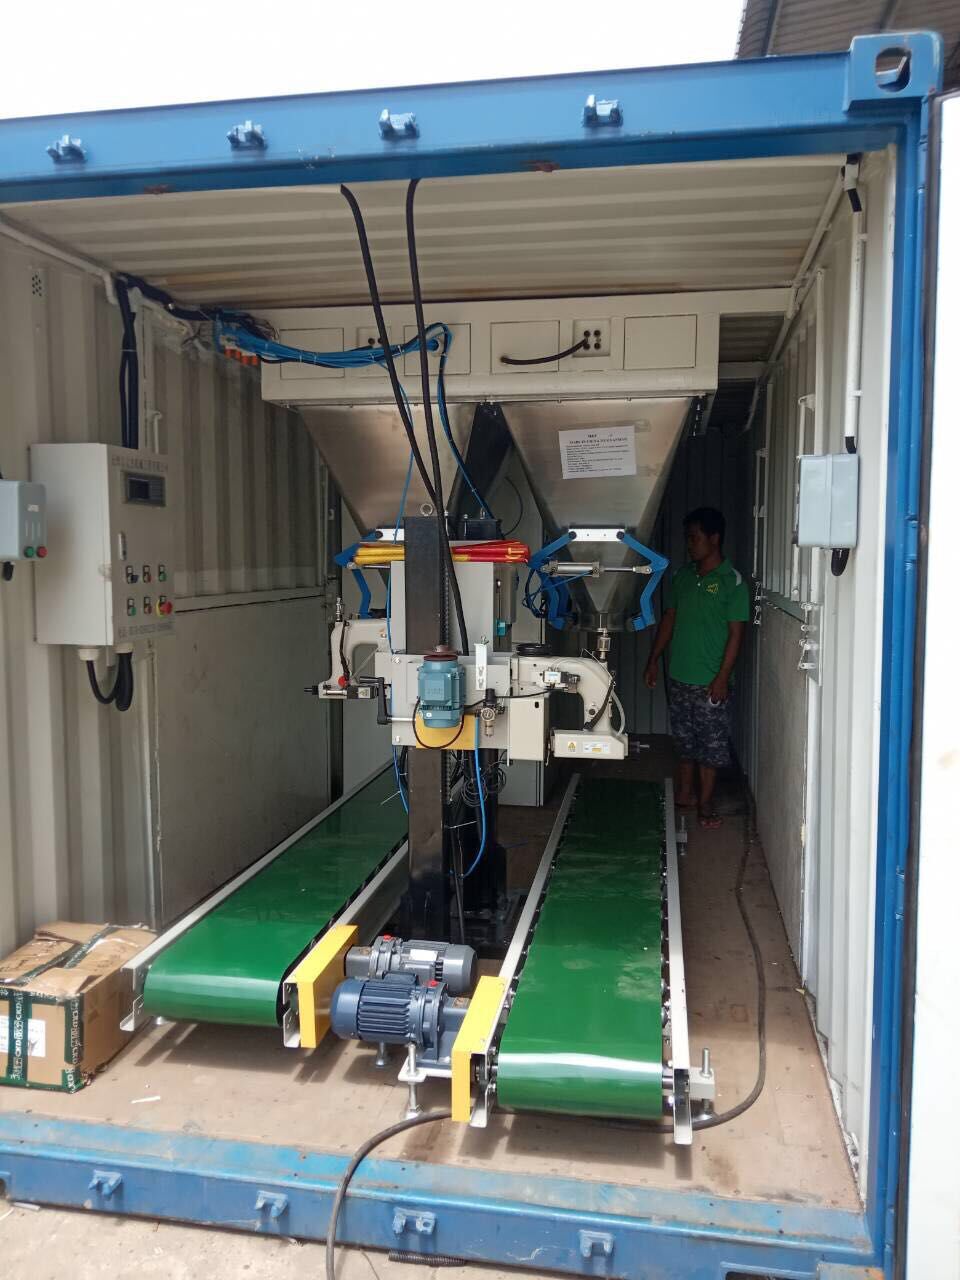 MOBILE SUGAR BAGGING MACHINES containerized bagging system Mobile Bagging Unit MOBILE BAGGING MACHINES for Grains, pulses, iodised salts, sugar Containerised bagging system